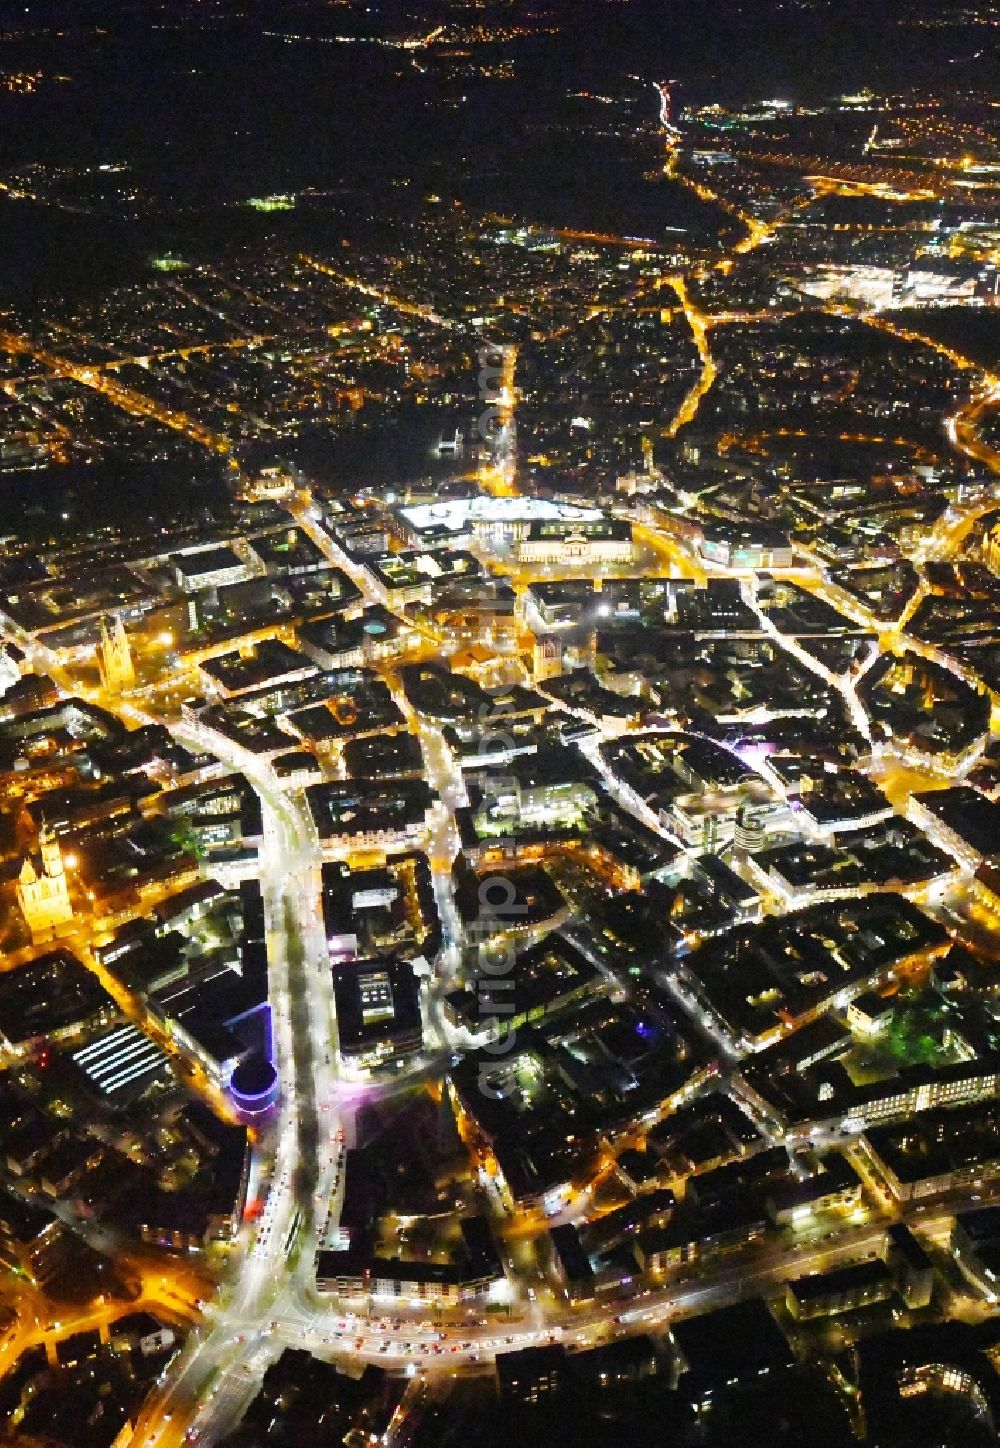 Aerial image at night Braunschweig - Night lighting The city center in the downtown area in Brunswick in the state Lower Saxony, Germany